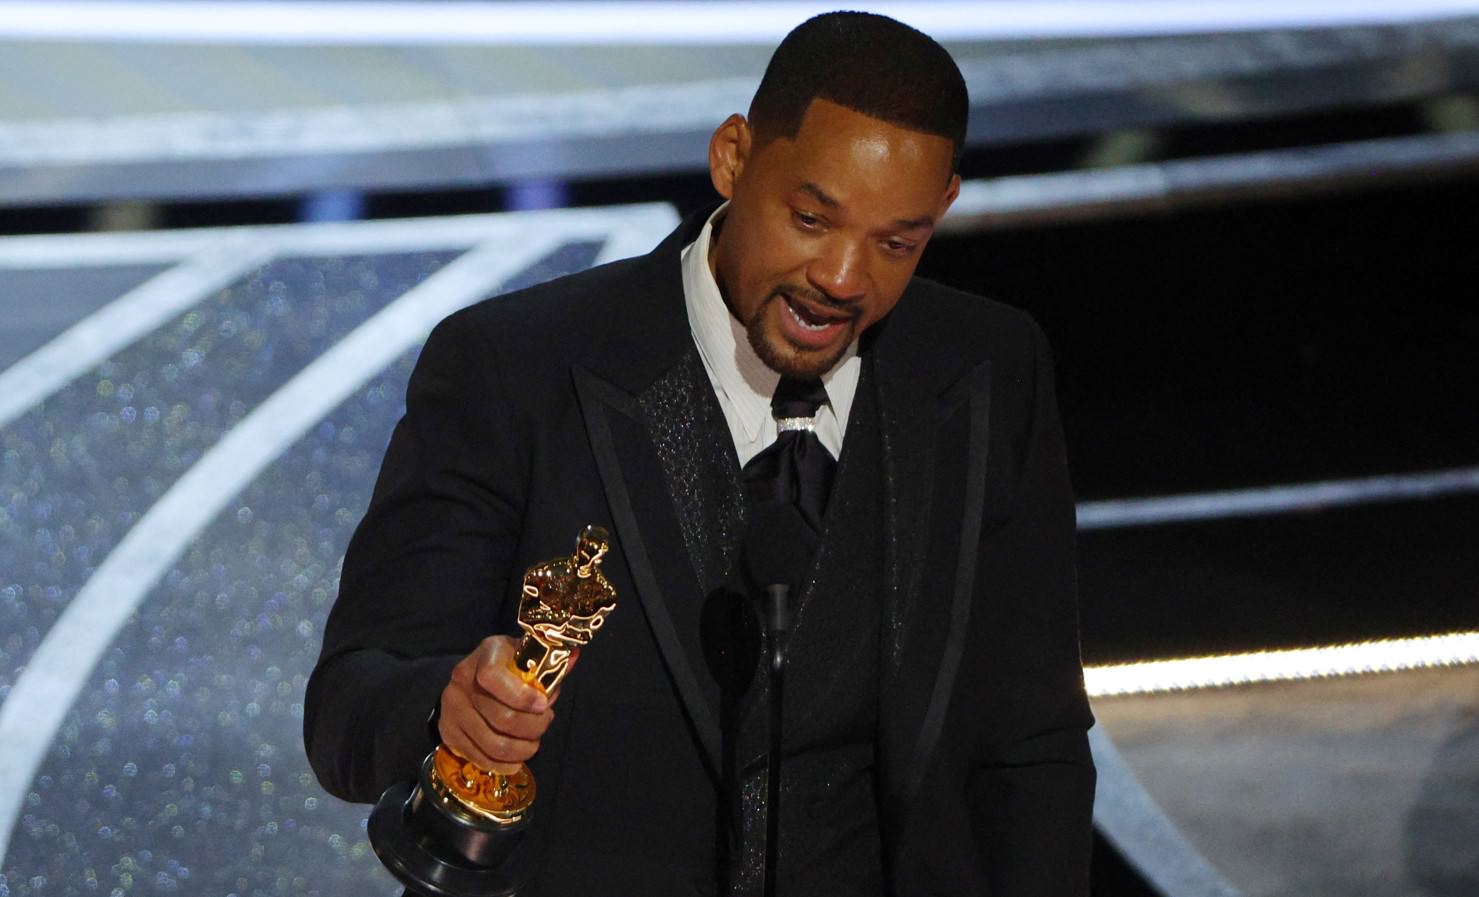 will-smith-reuters.jpg